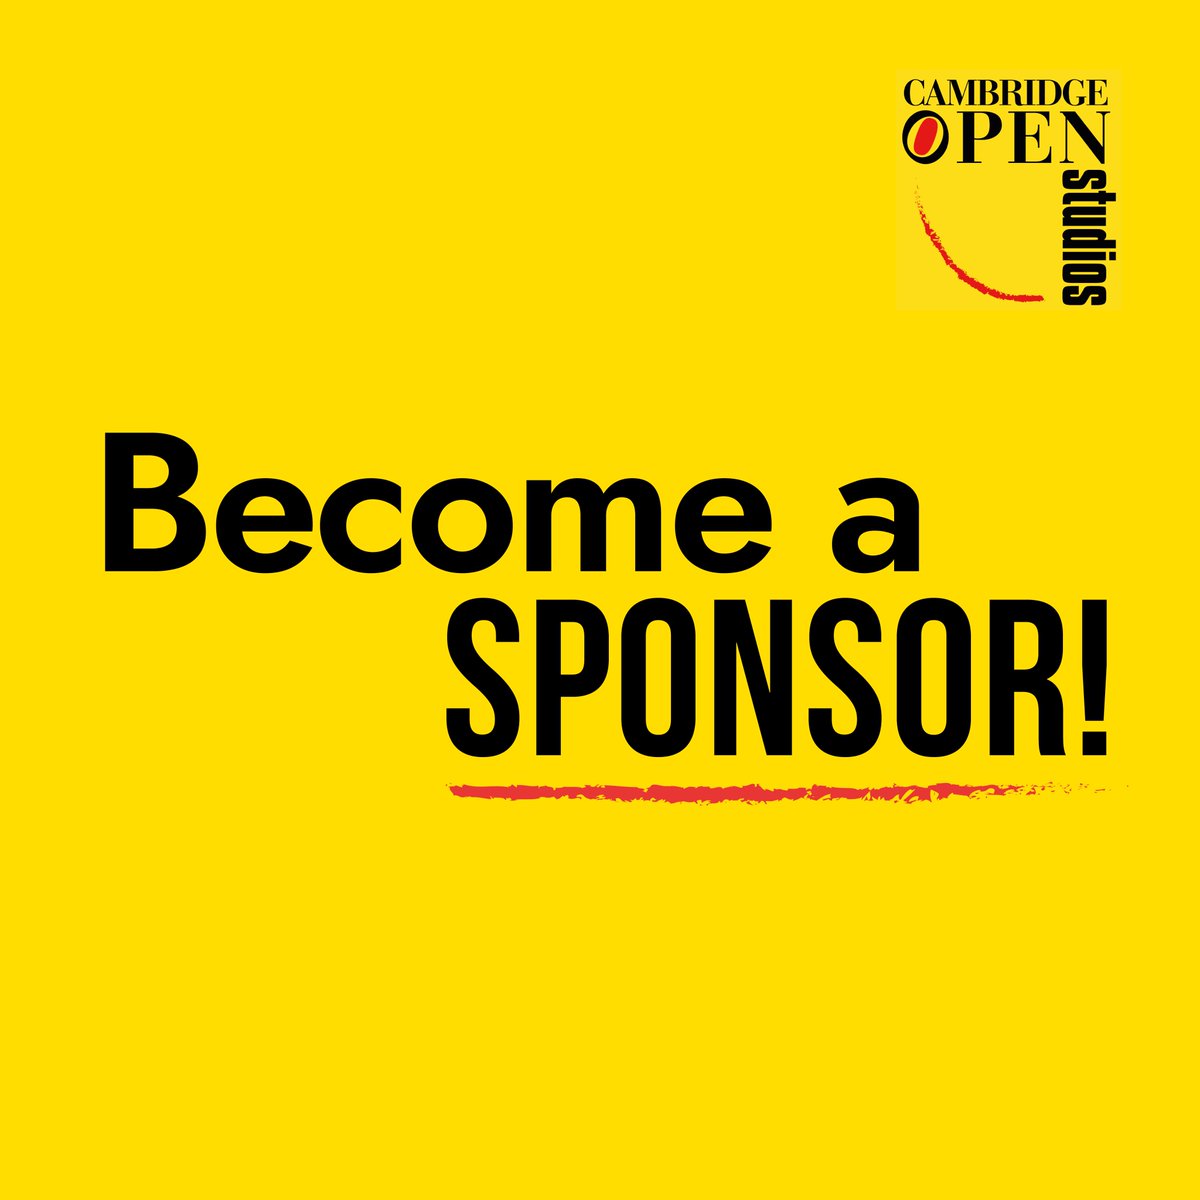 Calling all #Cambridgeshire businesses! Showcase your brand and highlight your company’s community values by supporting one of the UK’s oldest artist-run open studio organisations. Contact events@consciouscomms.com to learn more about becoming a #sponsor.